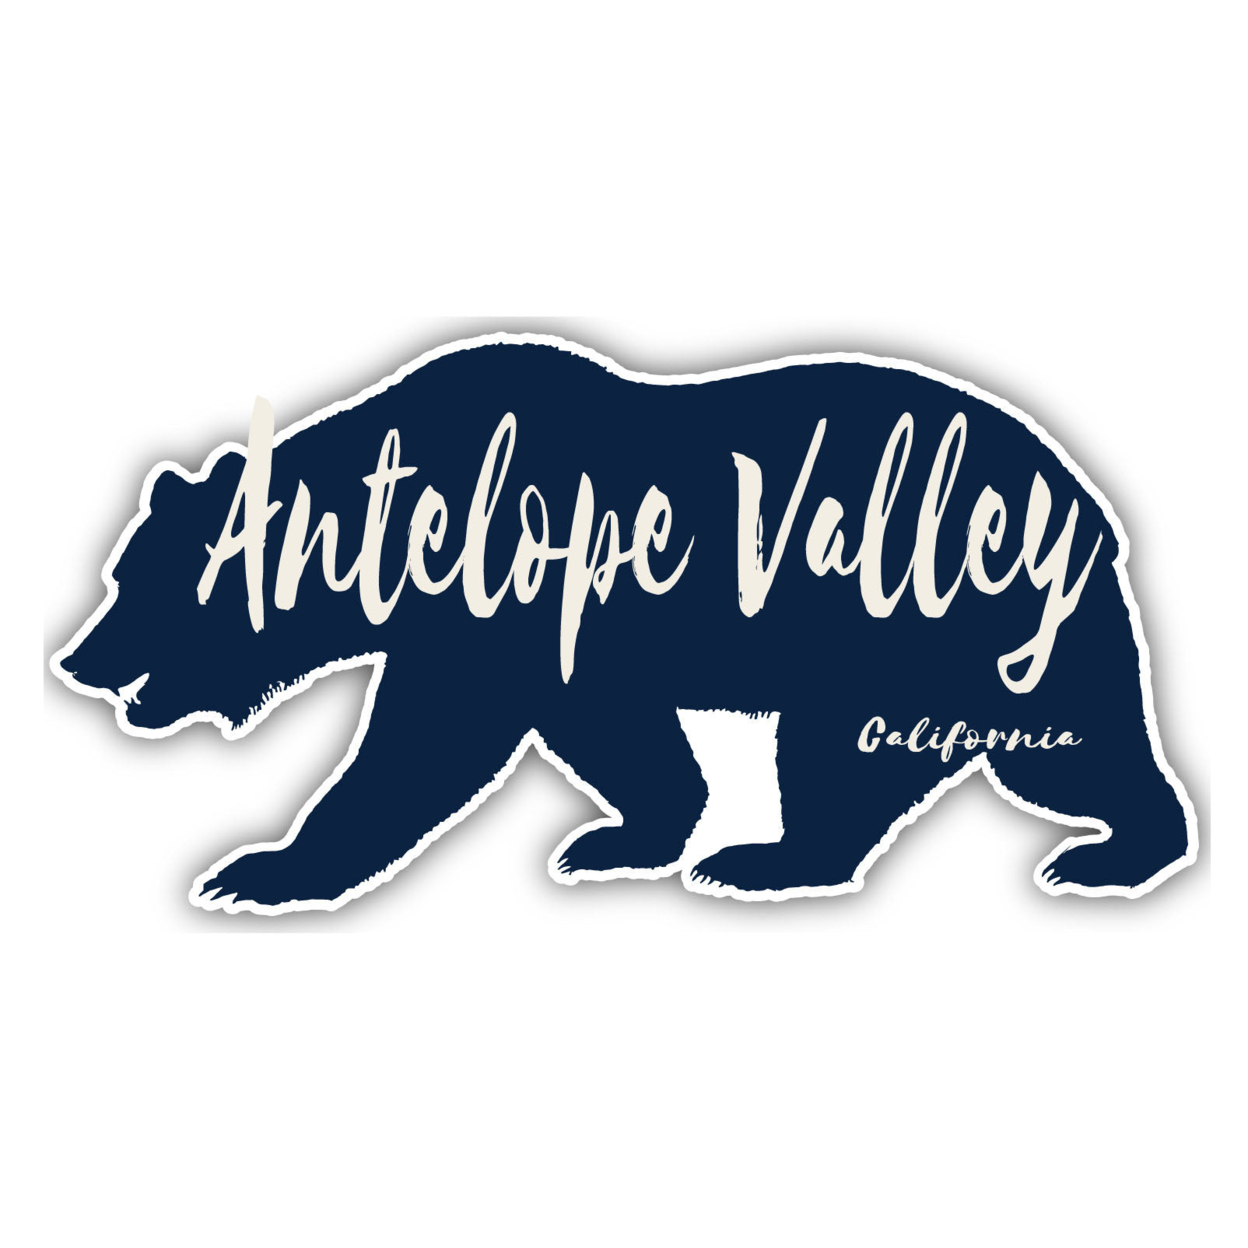 Antelope Valley California Souvenir Decorative Stickers (Choose Theme And Size) - Single Unit, 4-Inch, Bear